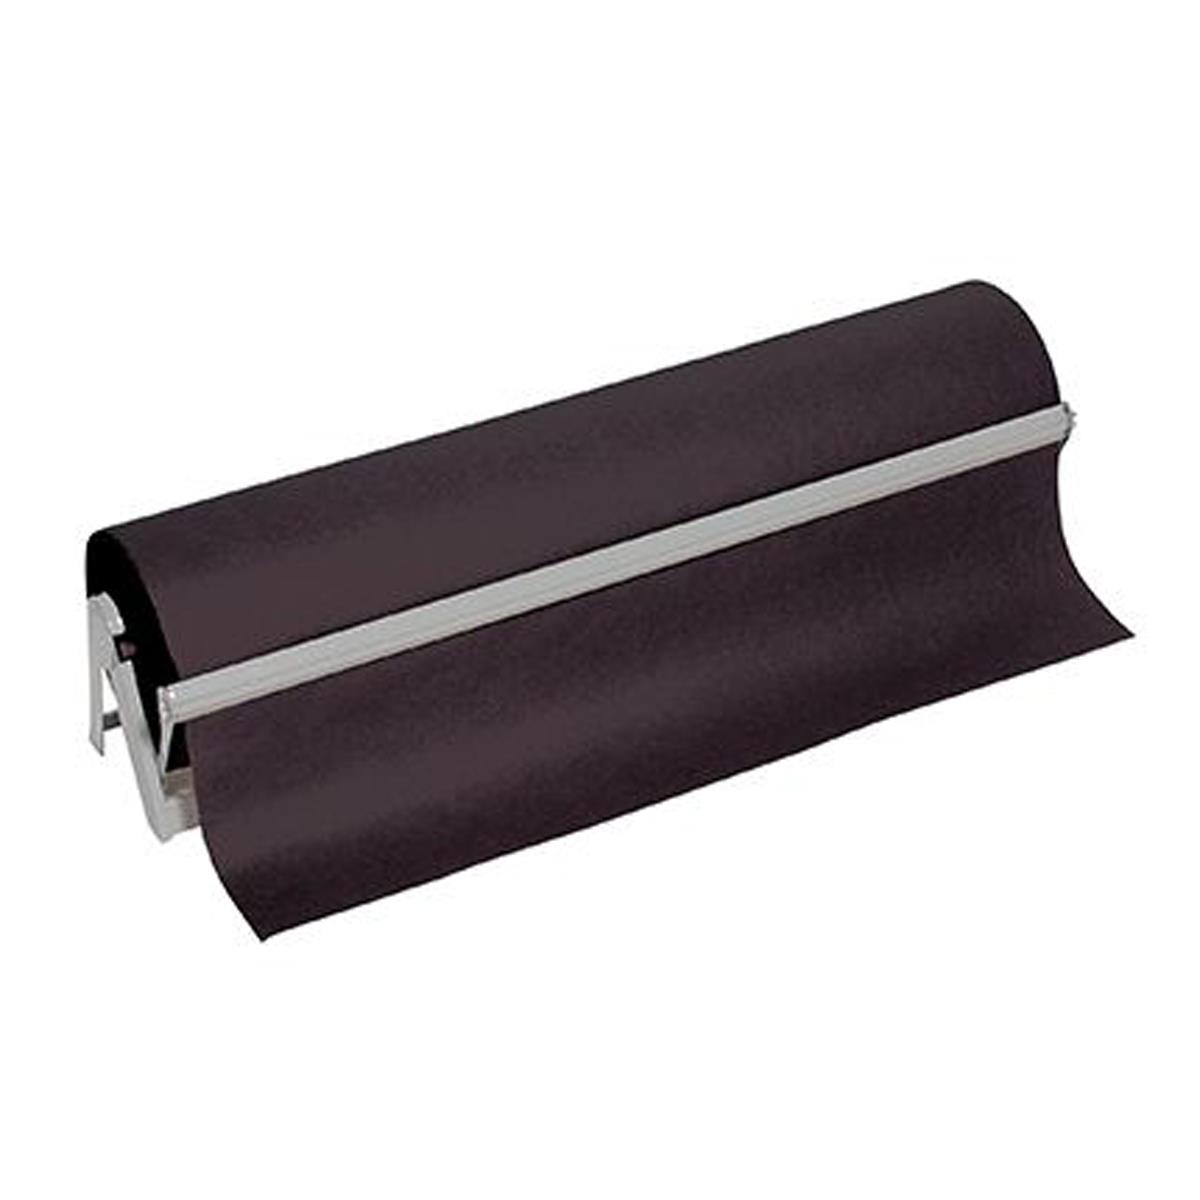 Image of Sirchie Block-Out Paper Roll